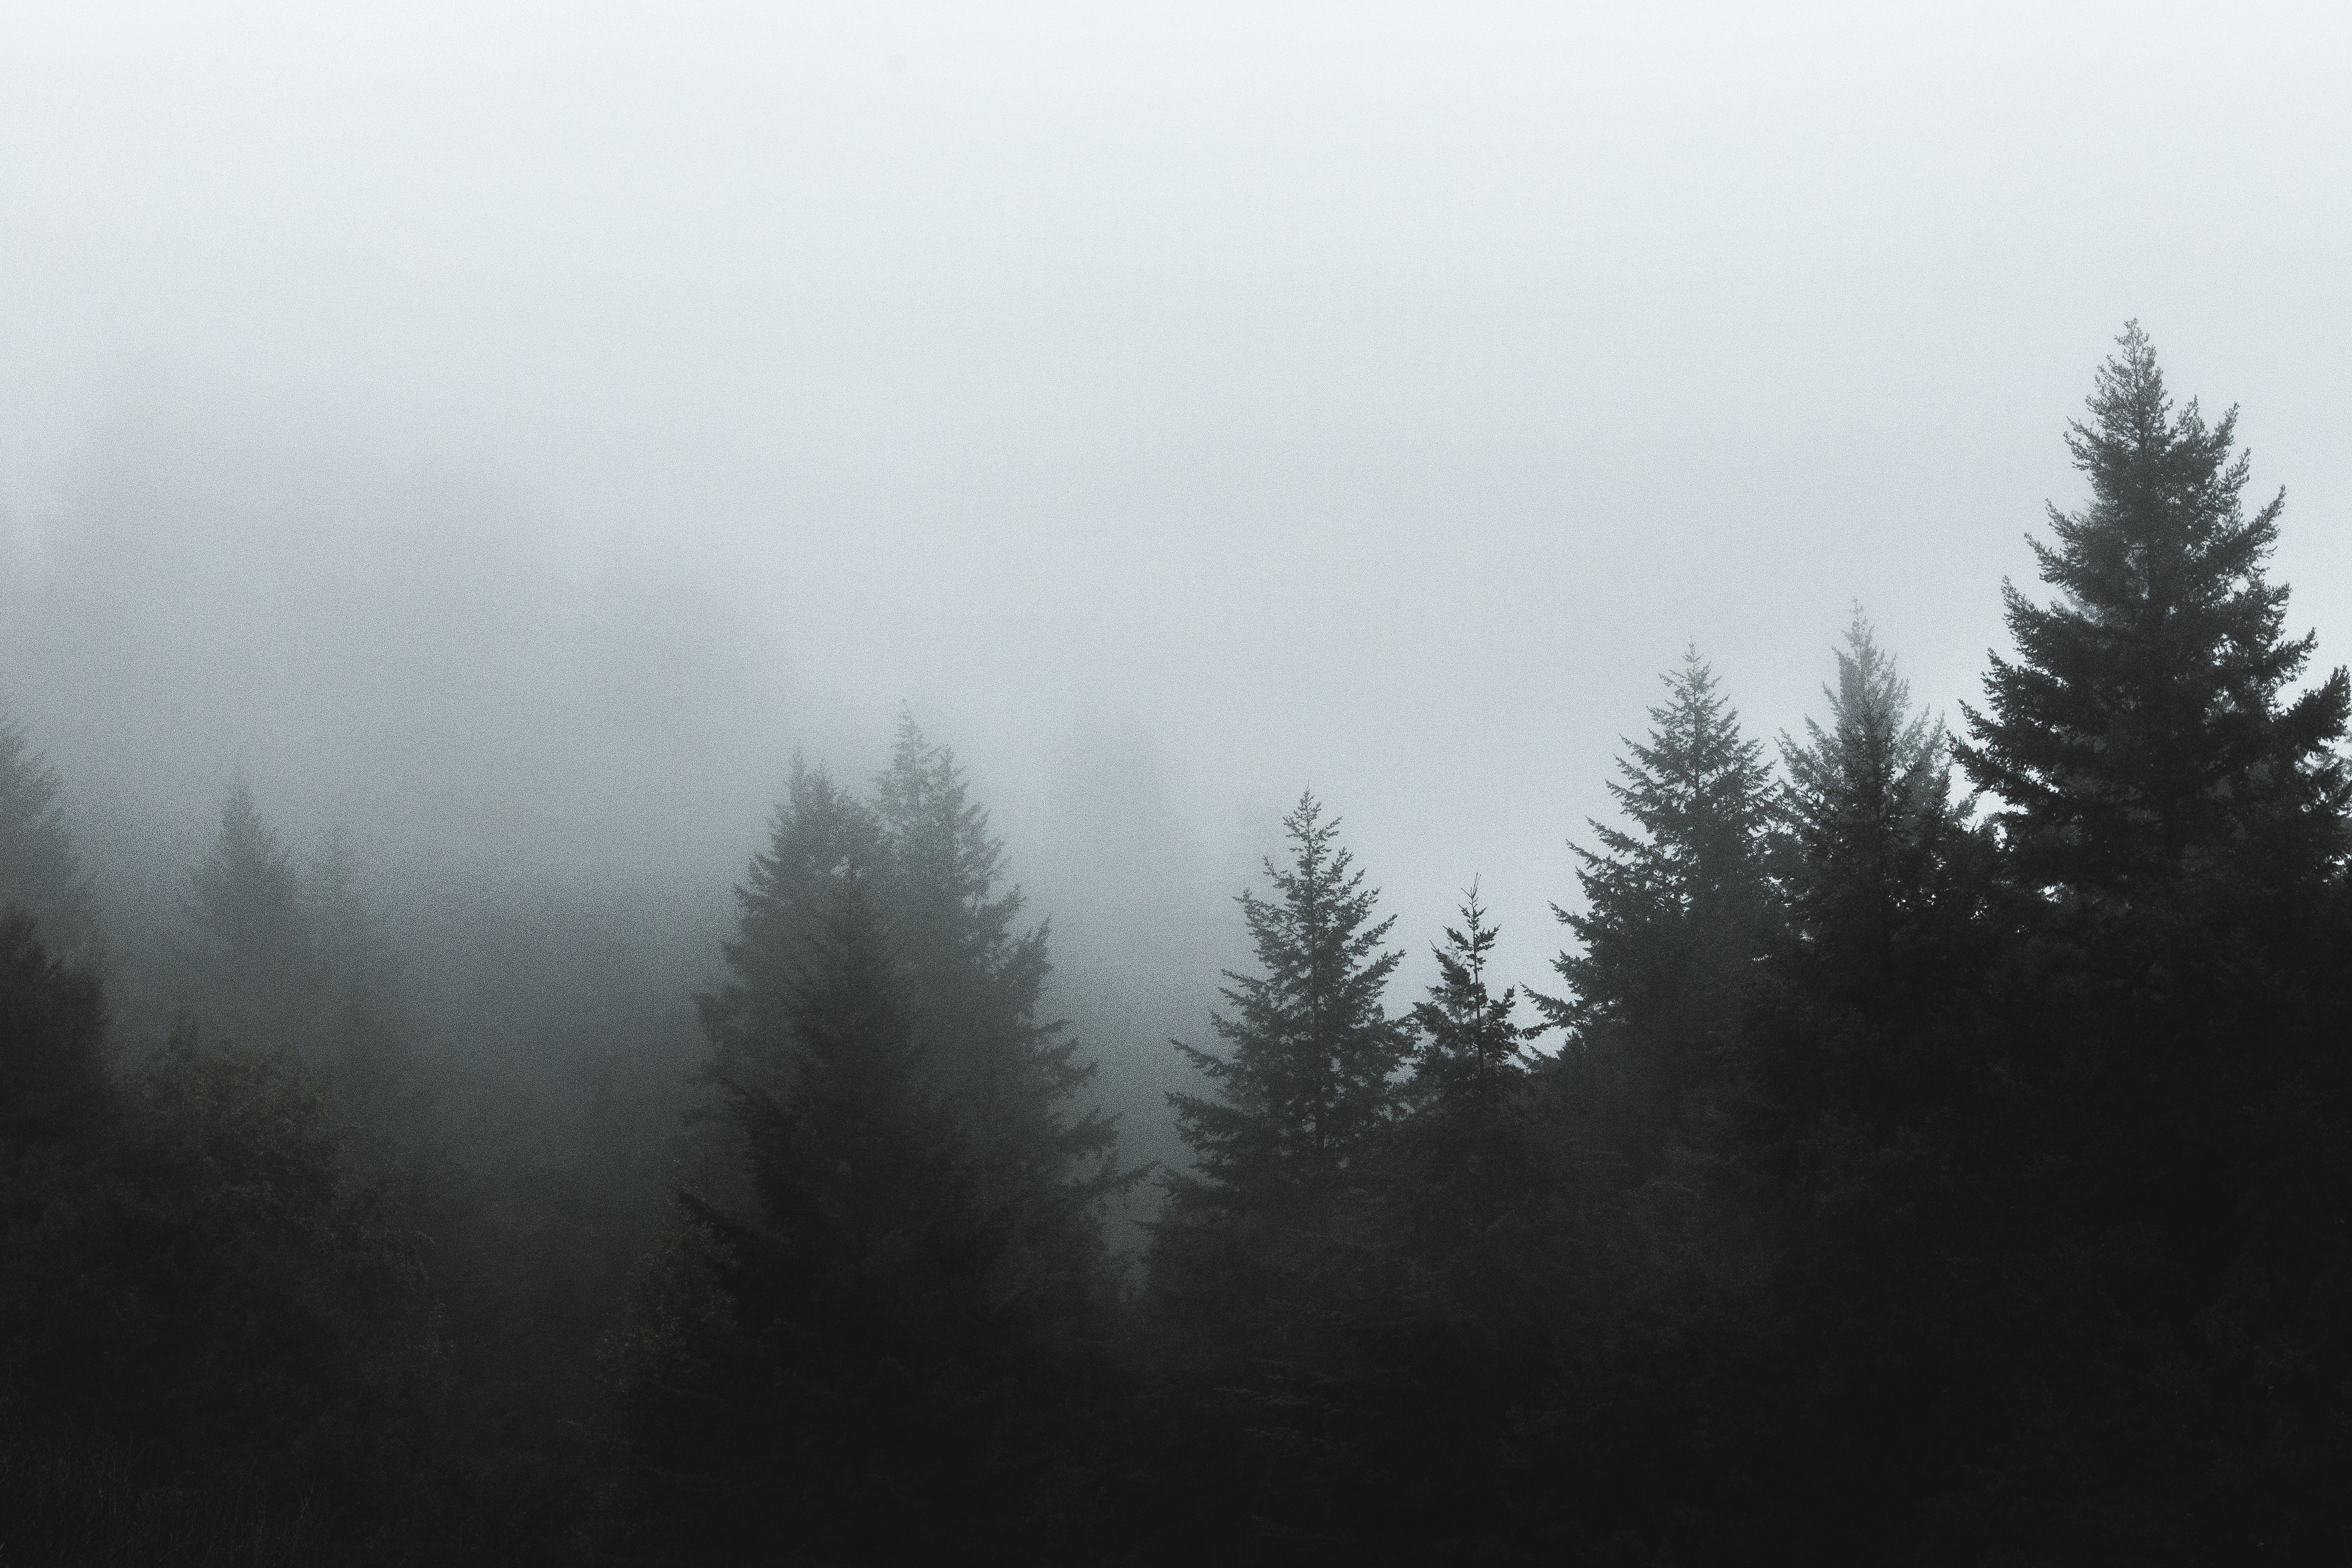 A foggy forest with pine trees in the foreground. - Fog